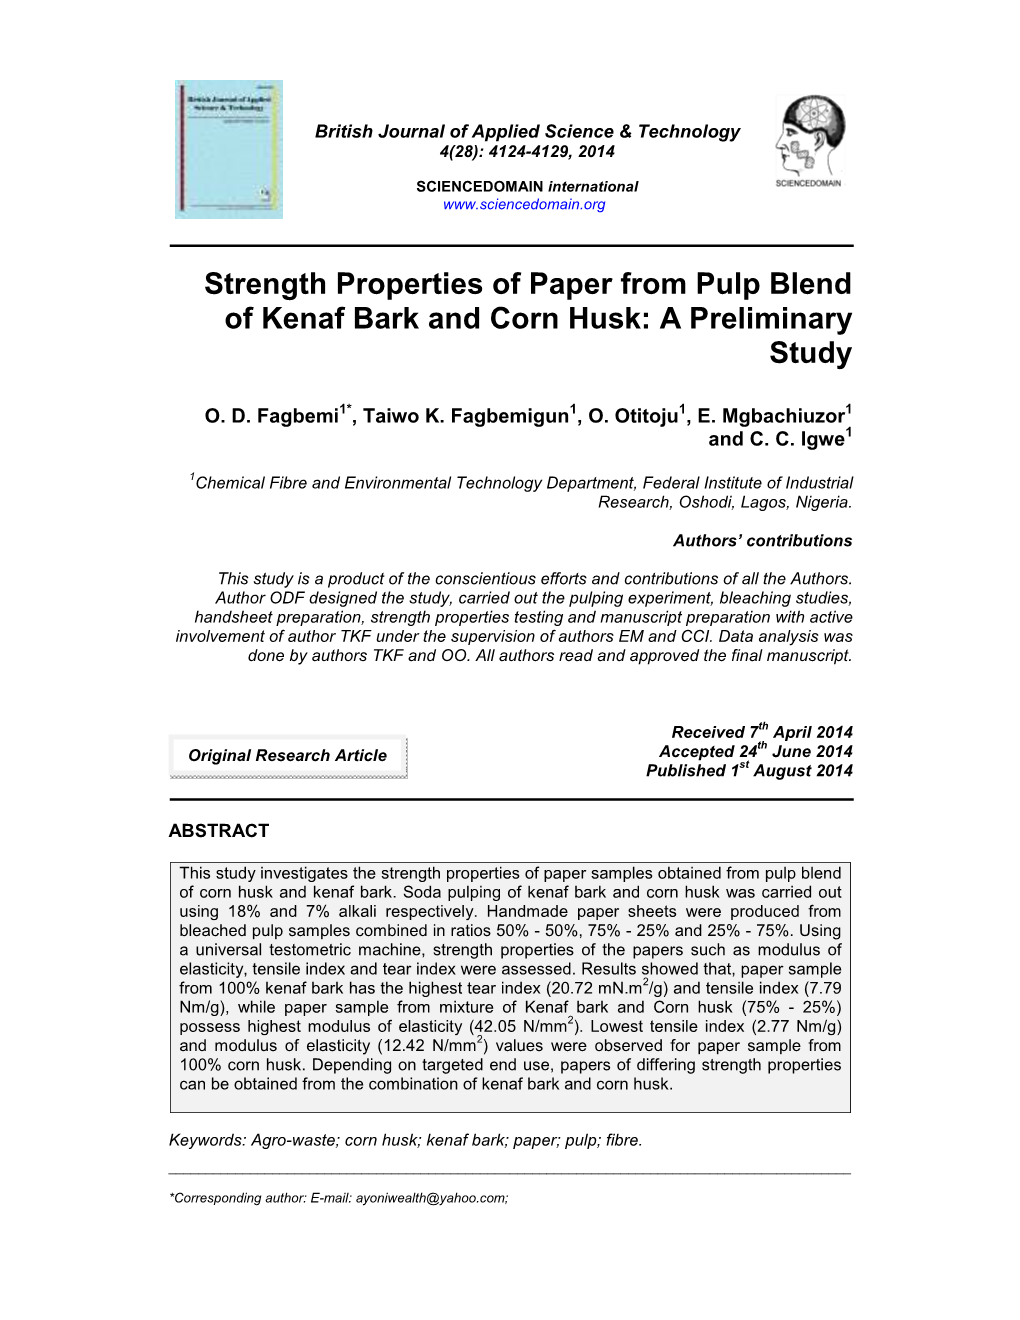 Strength Properties of Paper from Pulp Blend of Kenaf Bark and Corn Husk: a Preliminary Study